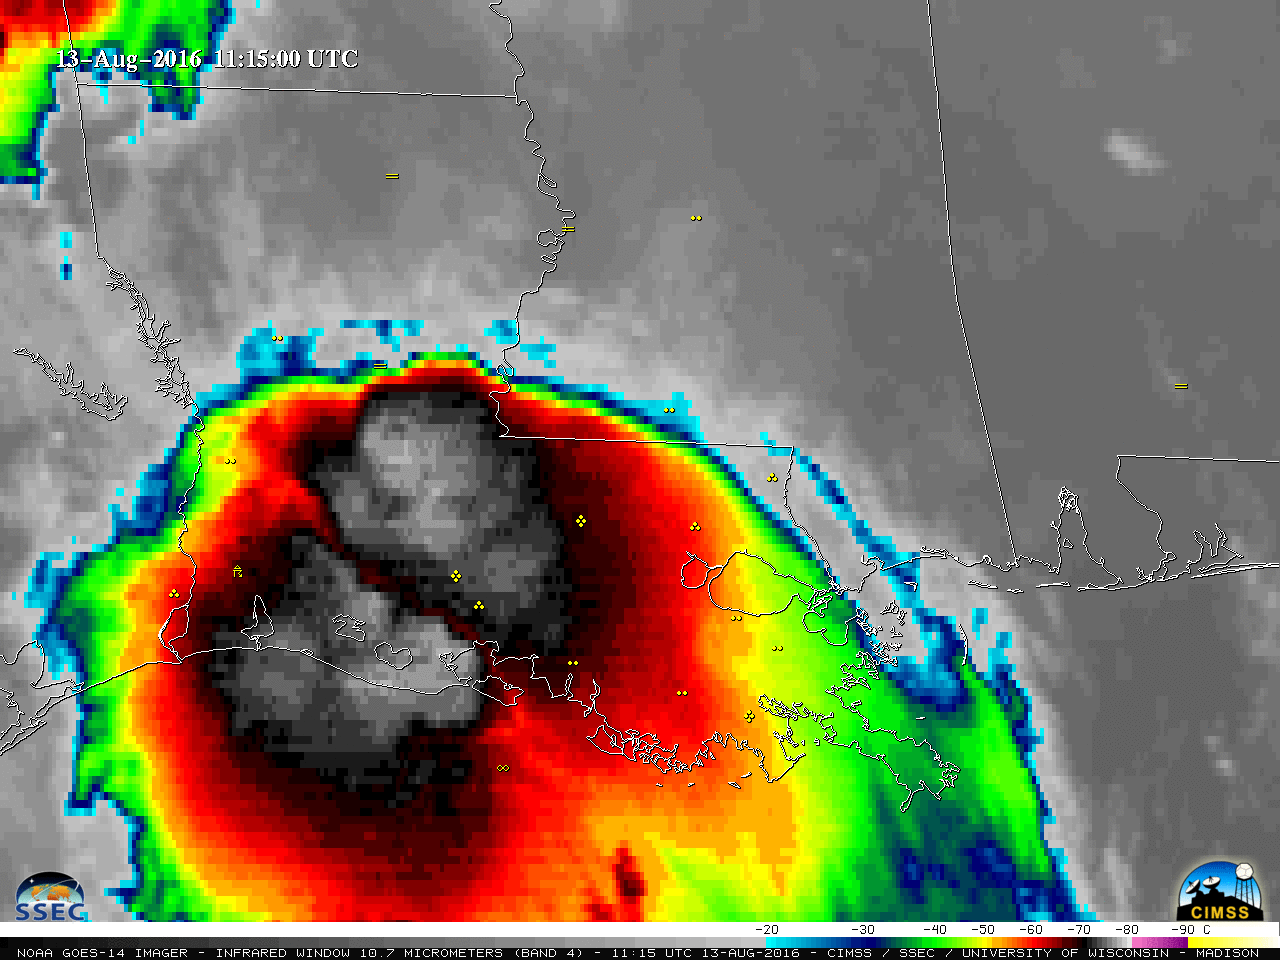 GOES-14 Infrared Window (10.7 µm) images, with hourly surface weather symbols plotted in yellow [click to play MP4 animation]